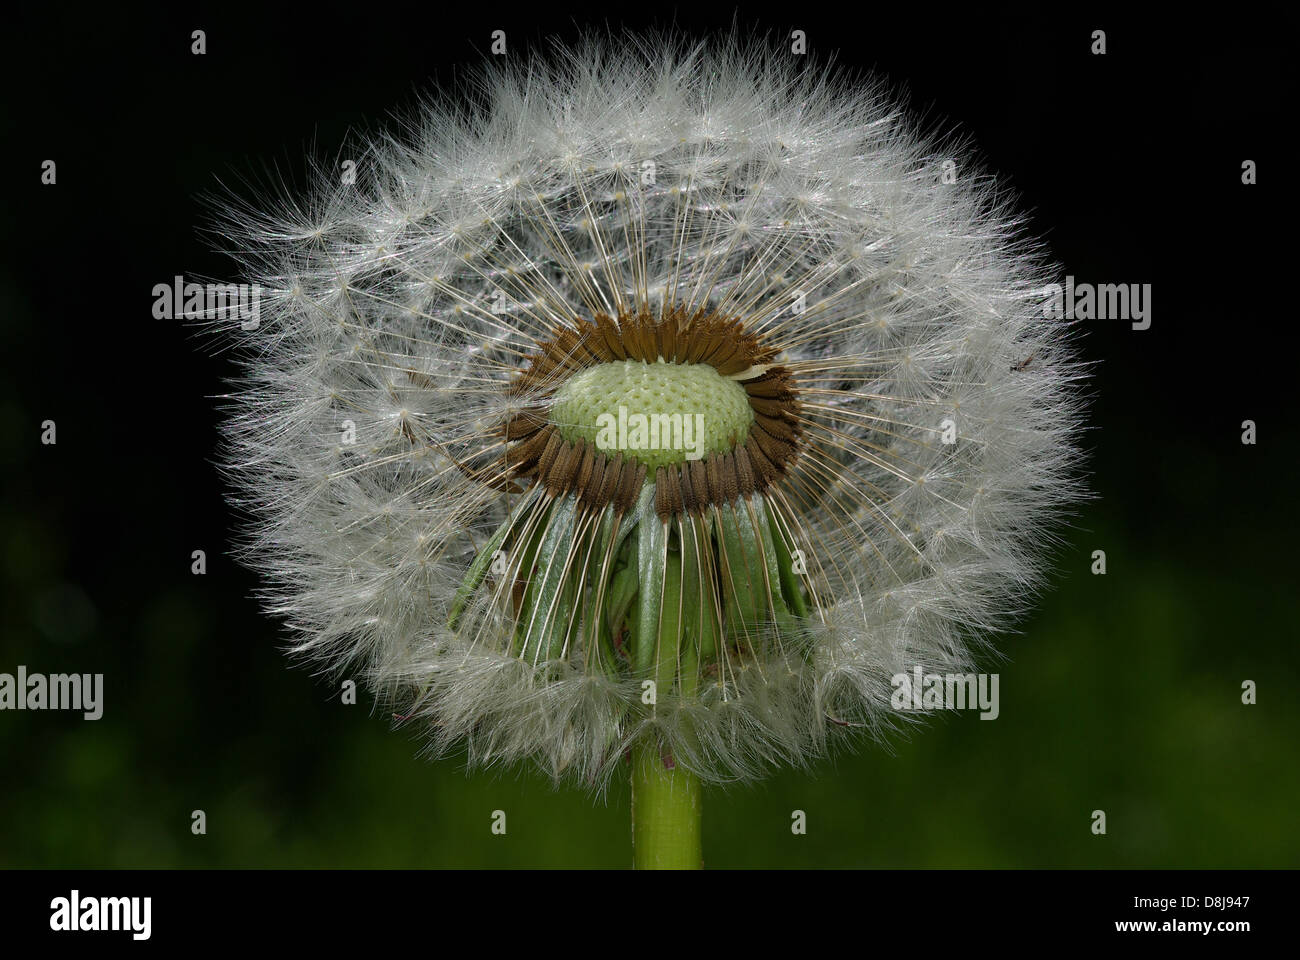 Withered Dandelion Blossom Stock Photo